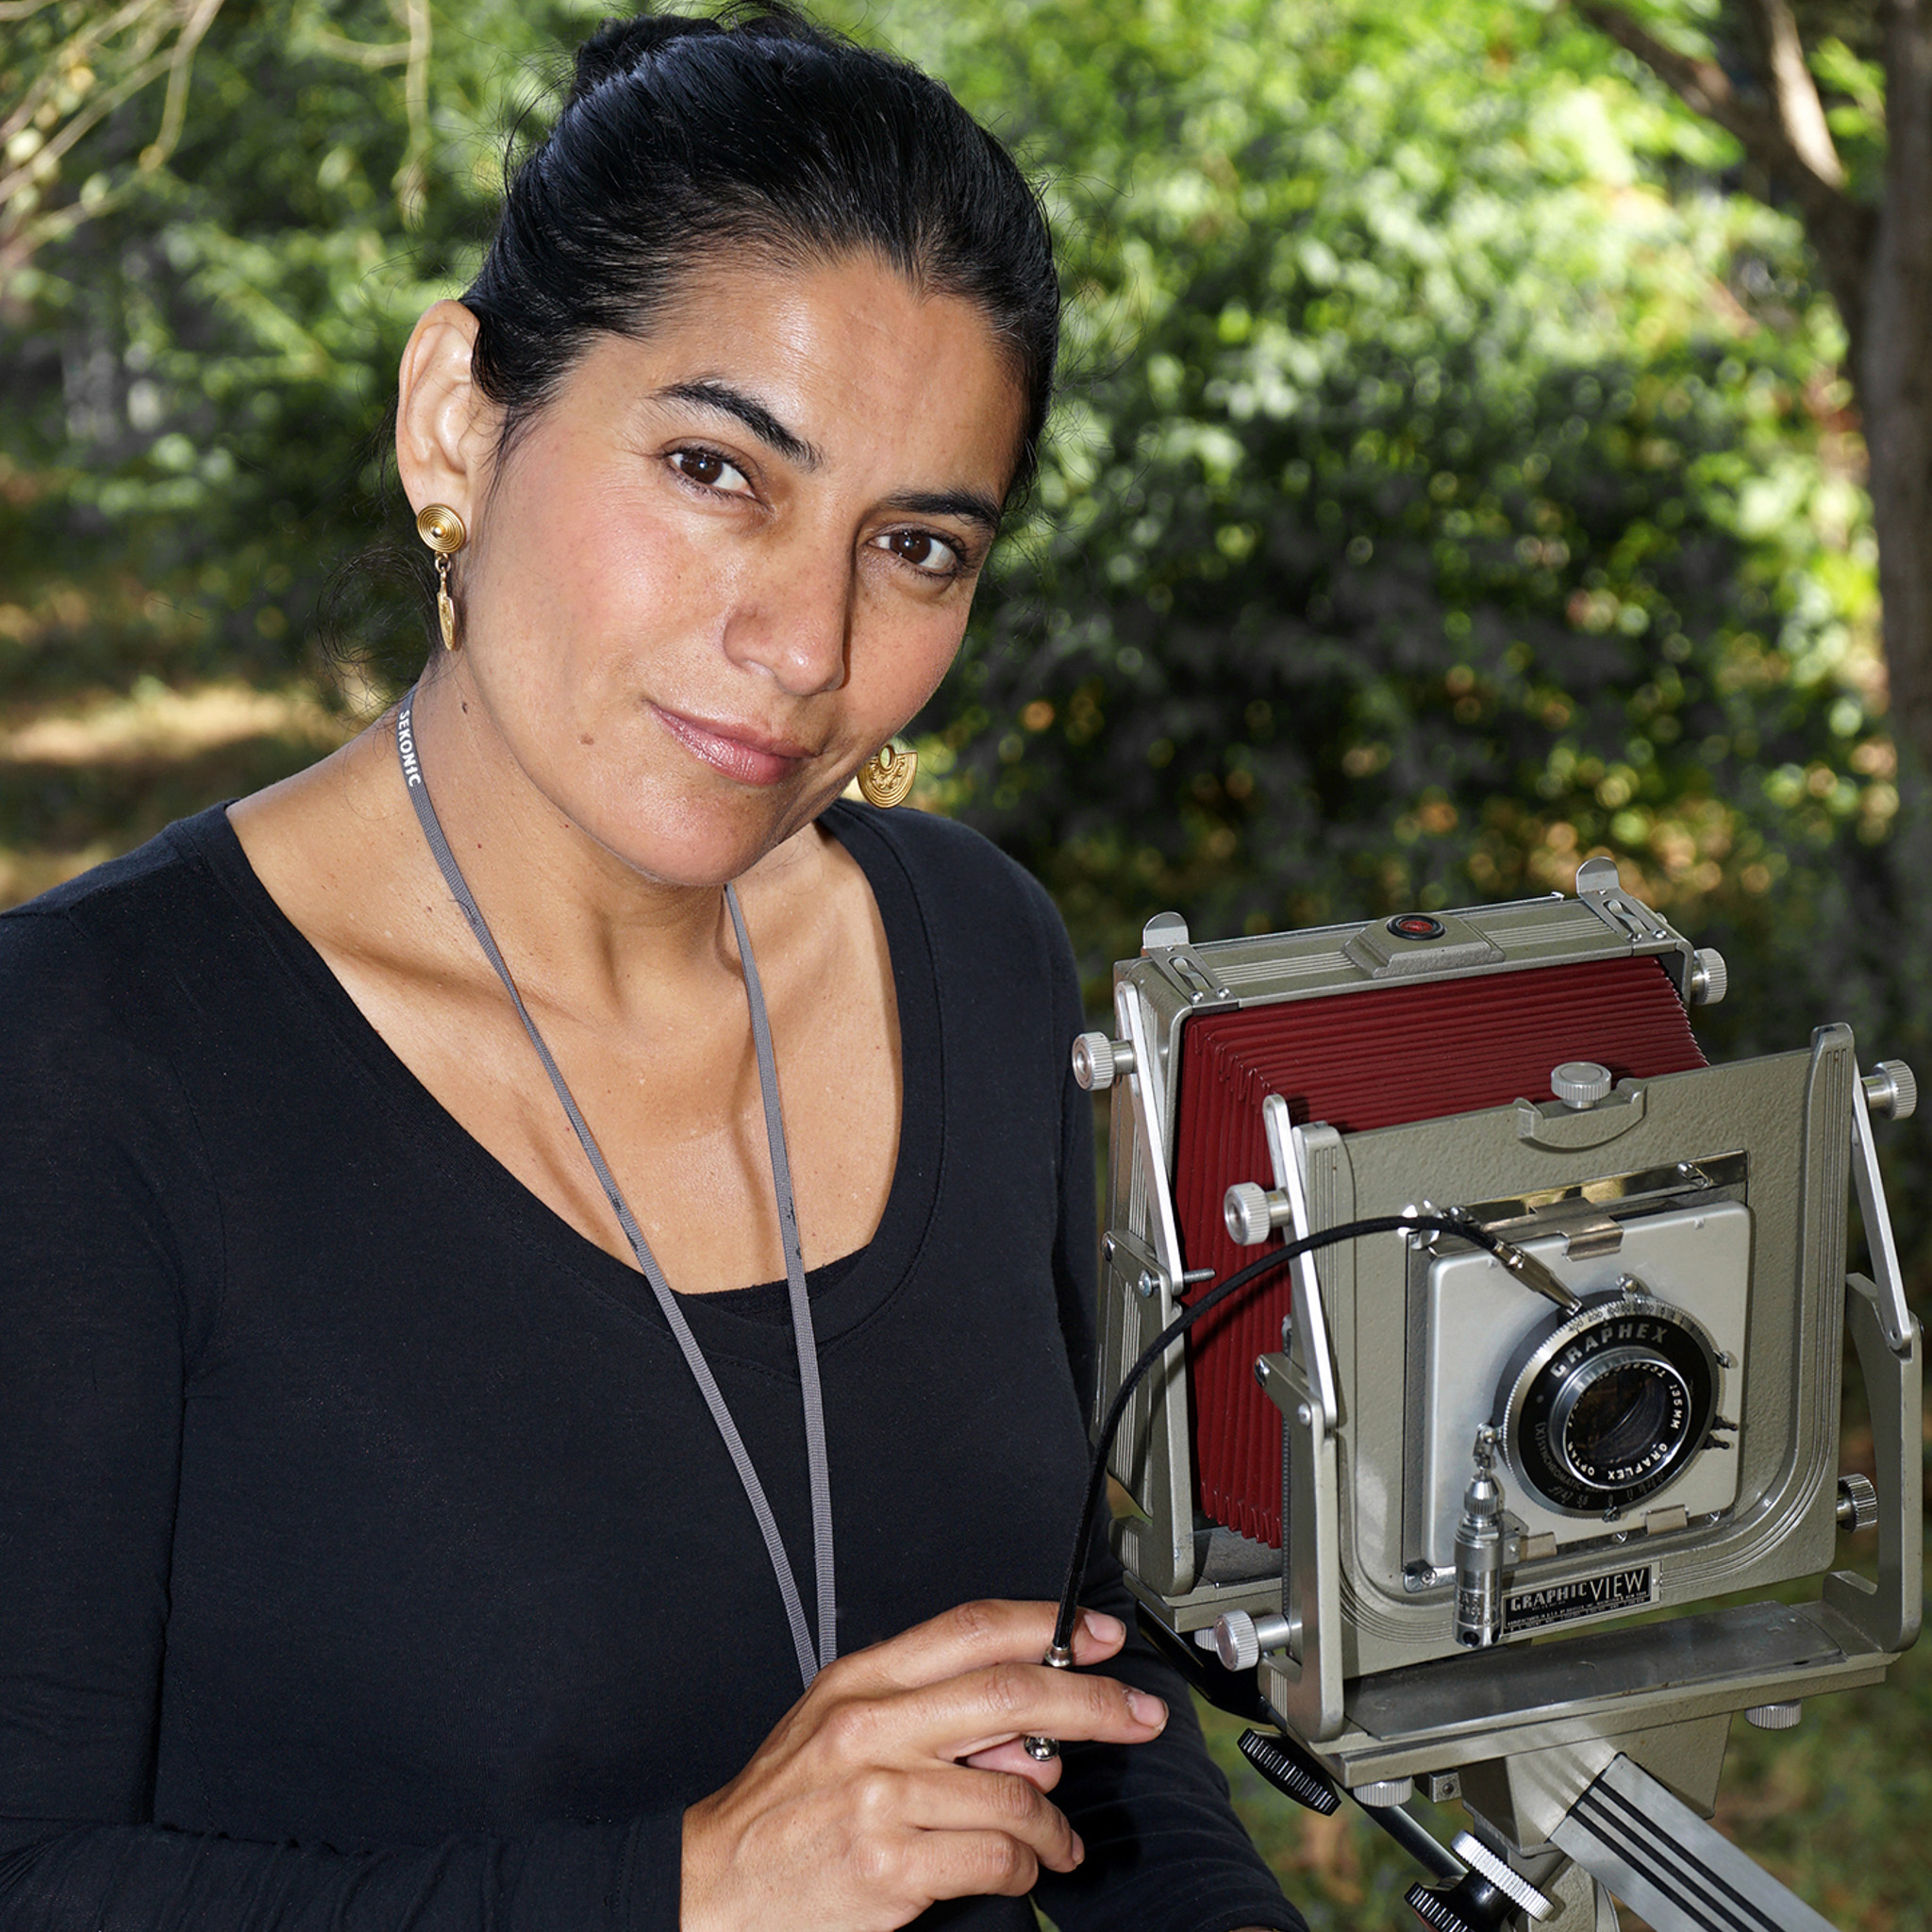 Photo of a woman smiling next to a camera.